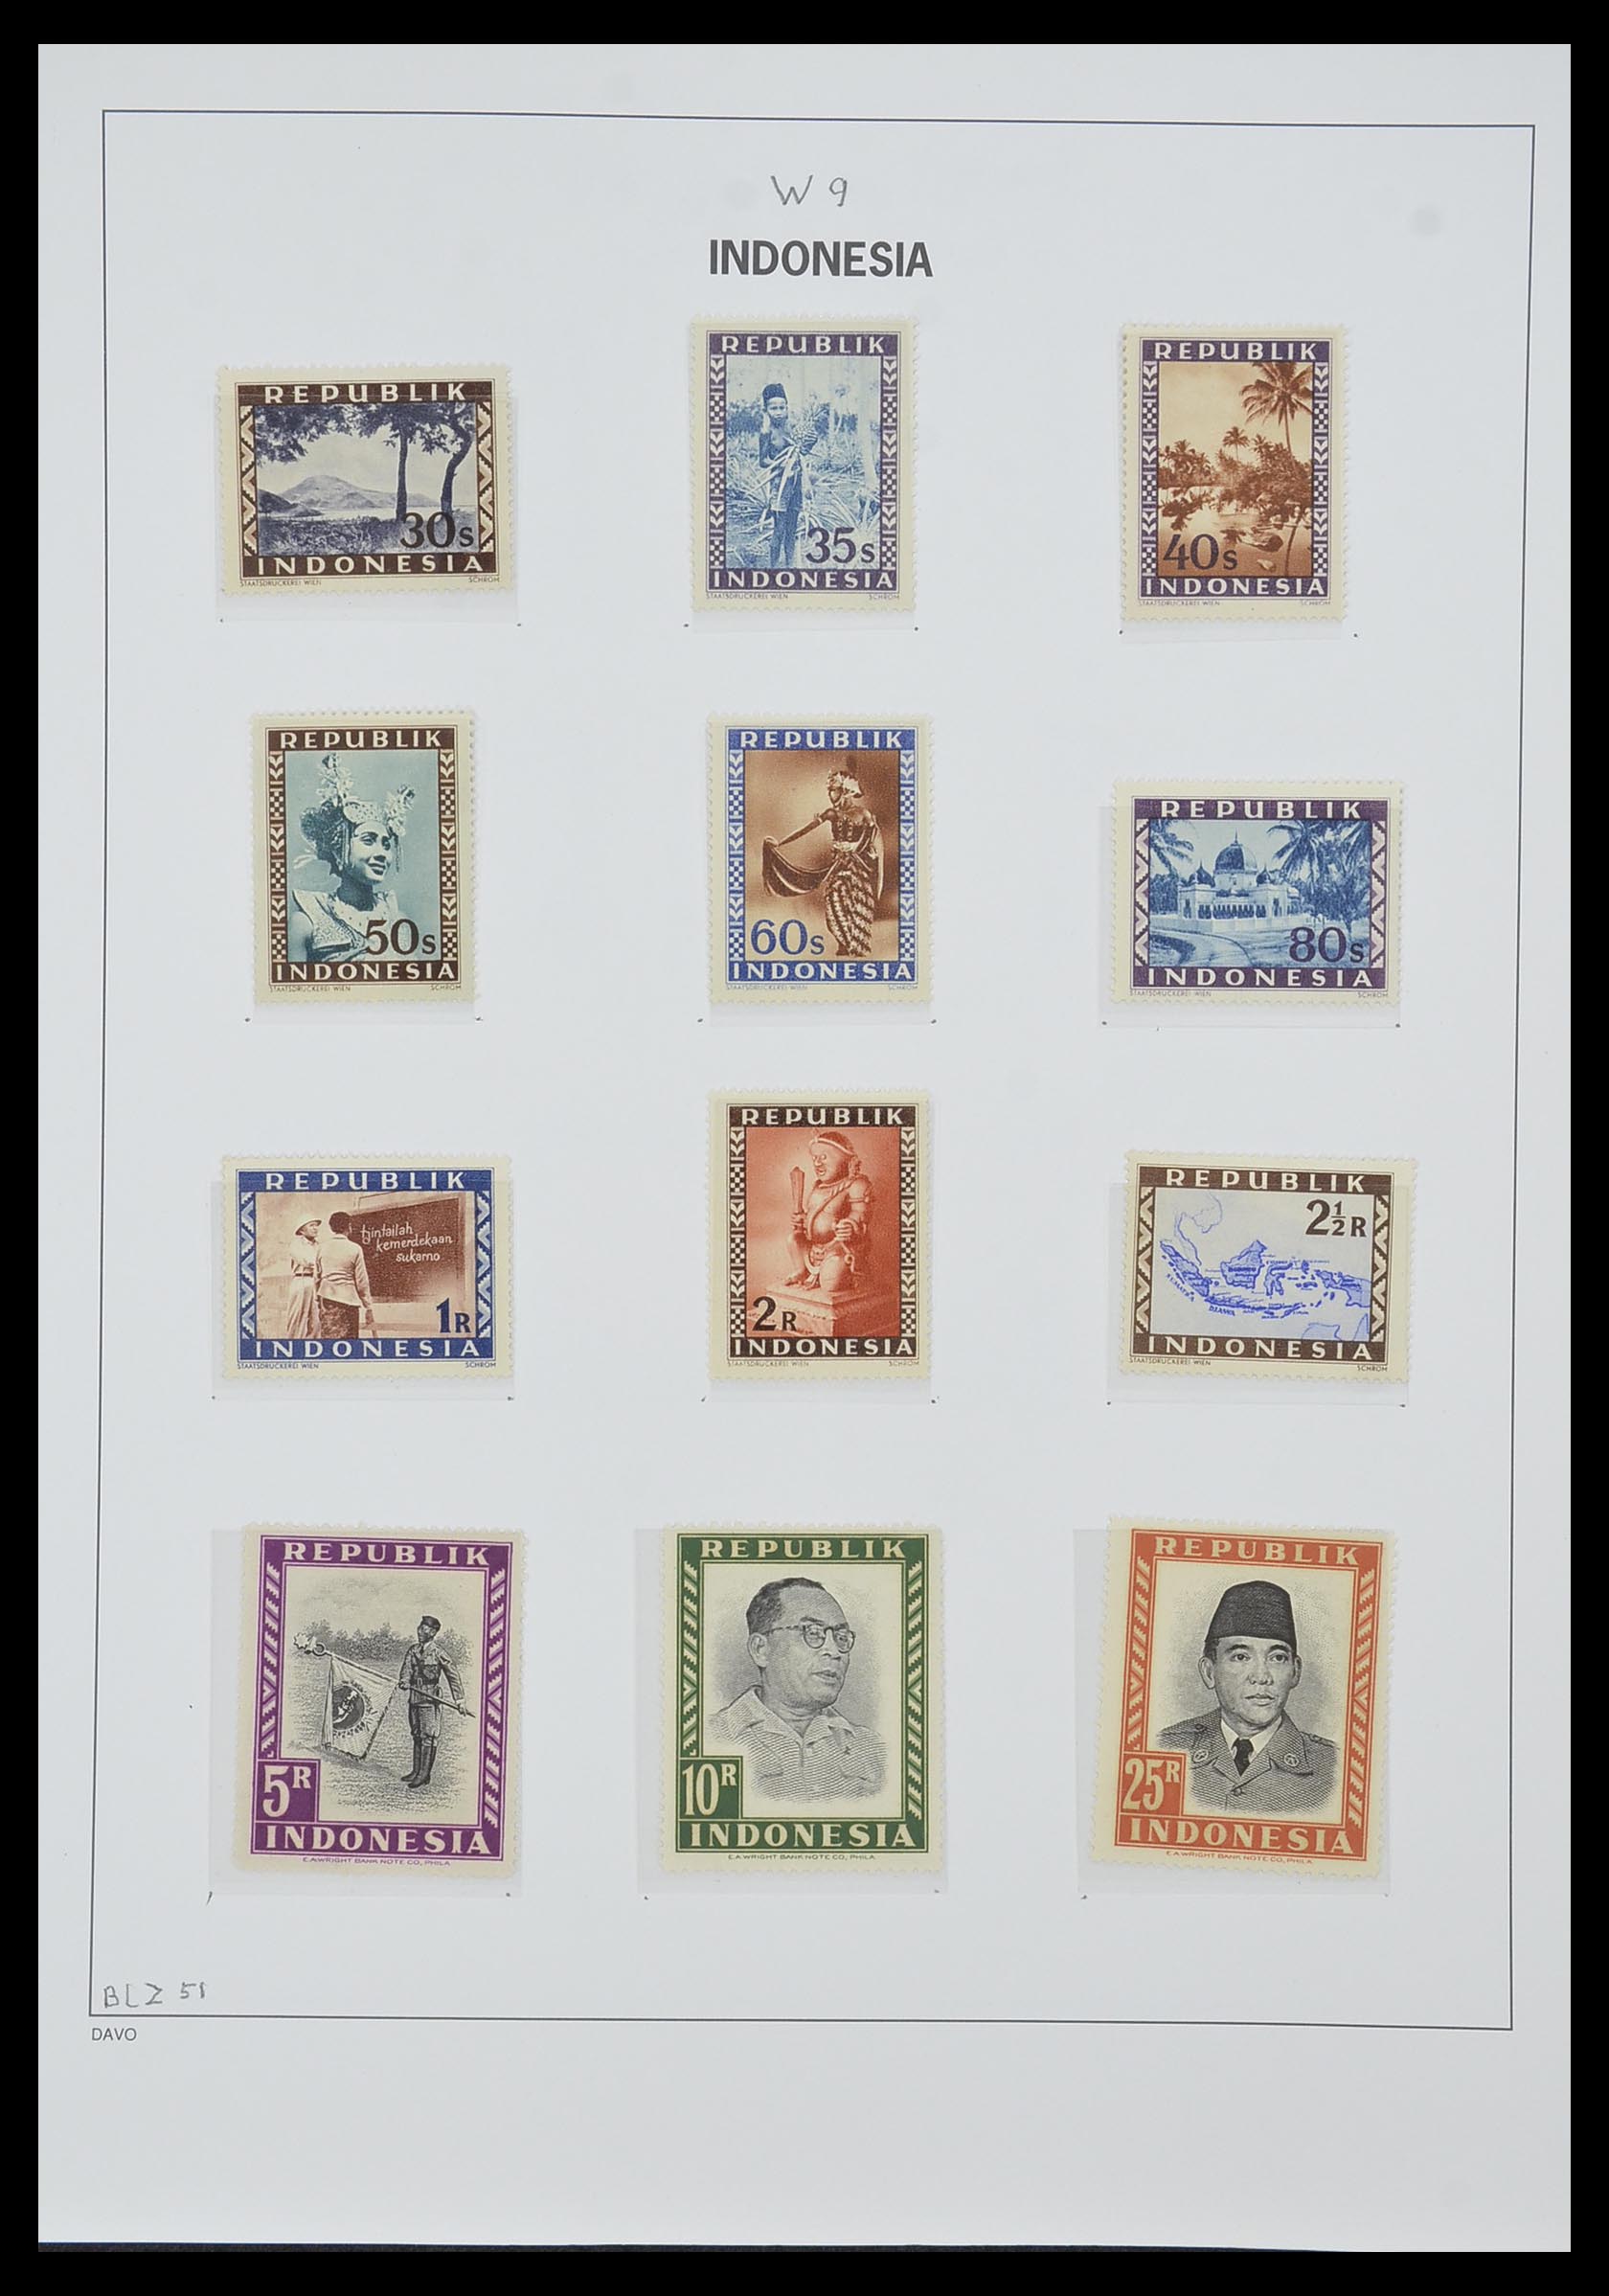 33988 020 - Stamp collection 33988 Vienna printings Indonesia.